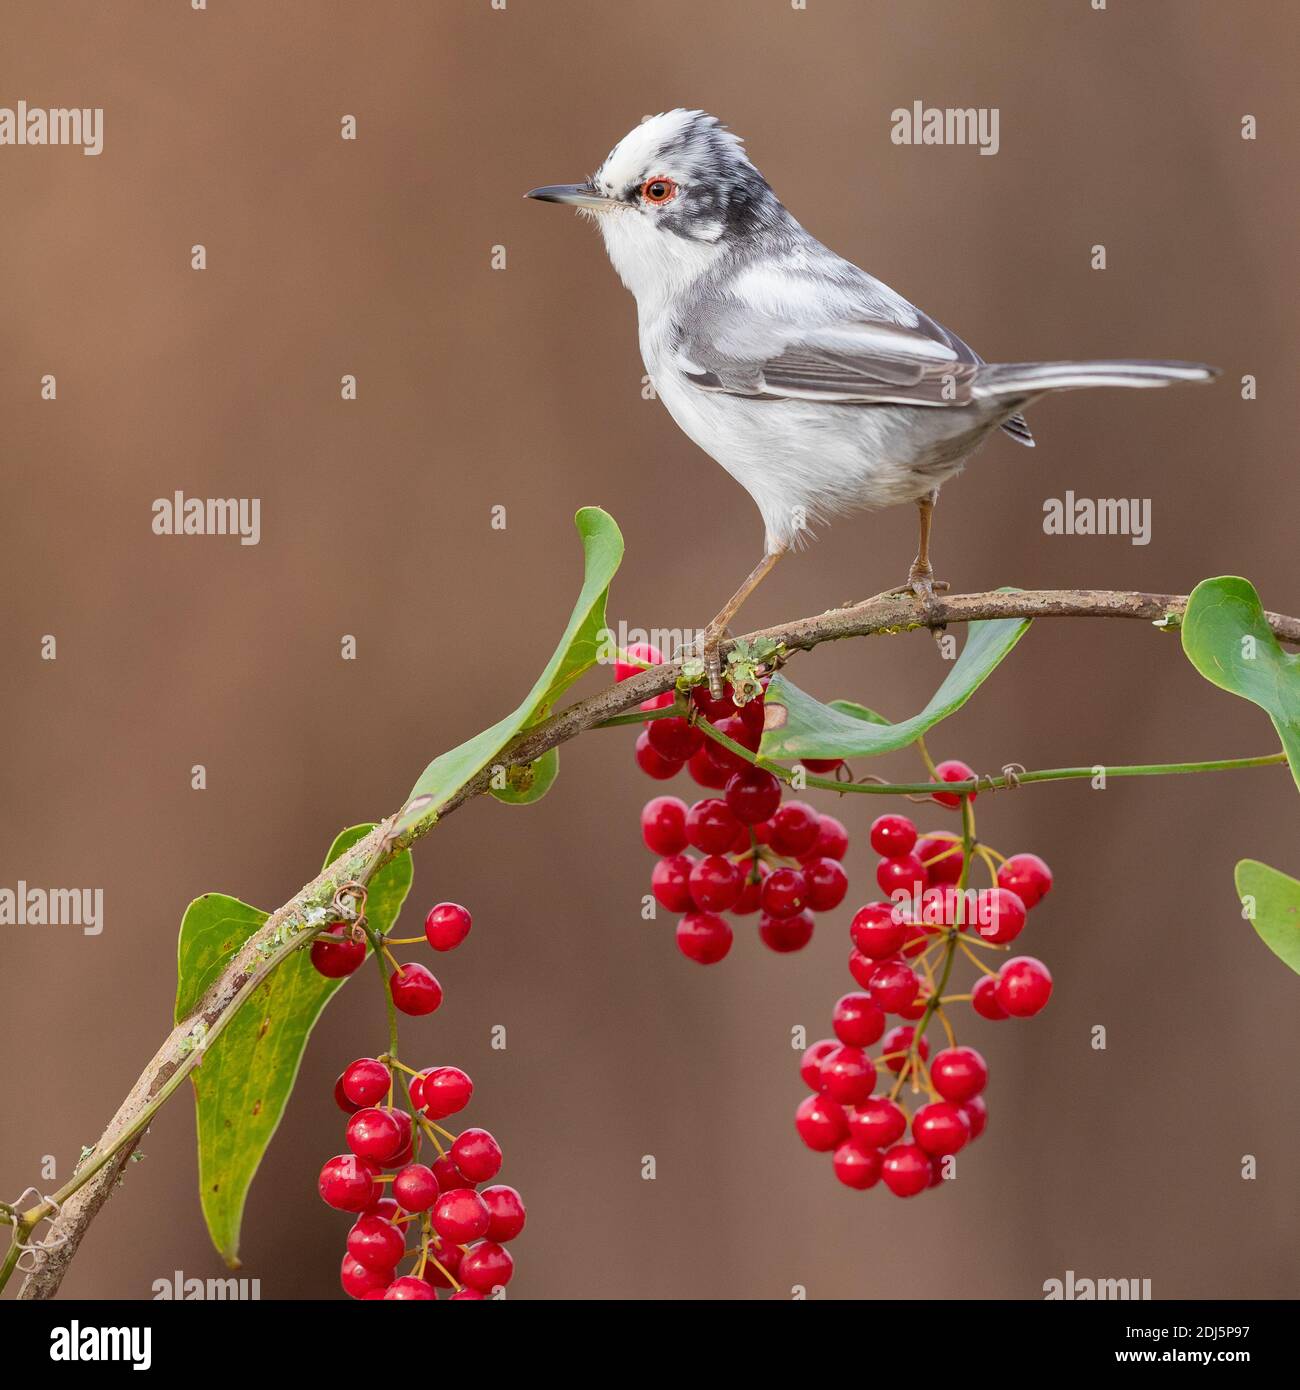 Sardinian Warbler (Sylvia melanocephala), side view of an adult male perched on a Common Smilax with berries, Campania, Italy Stock Photo